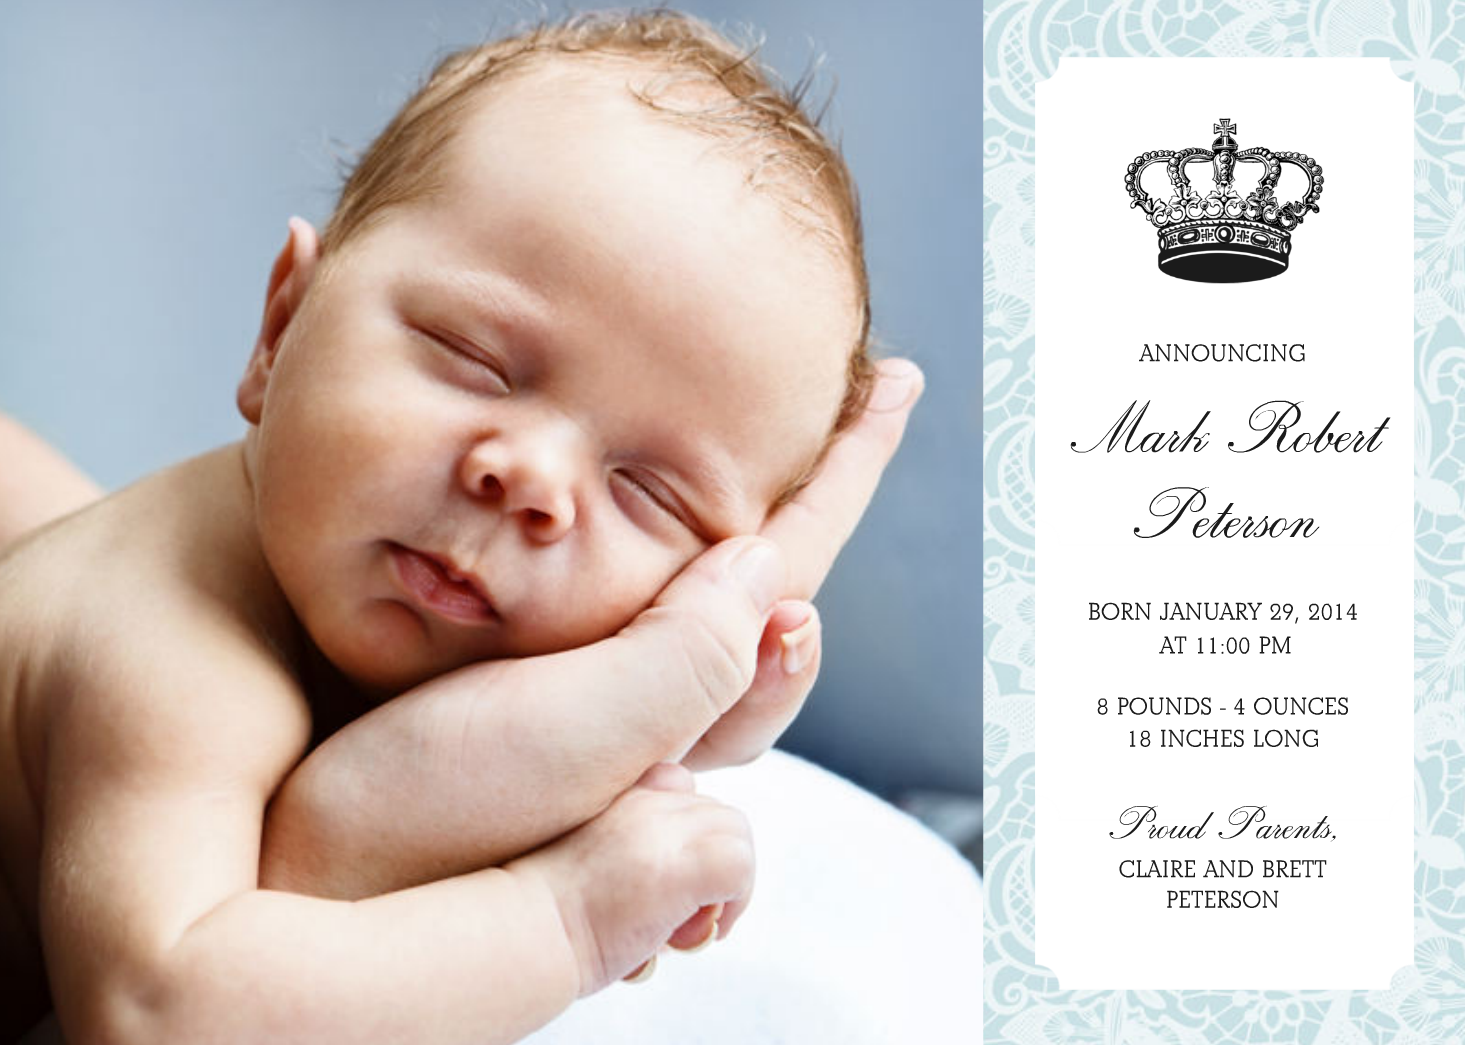 Create A Royal Announcement of Your Own, Inspired by the Birth of